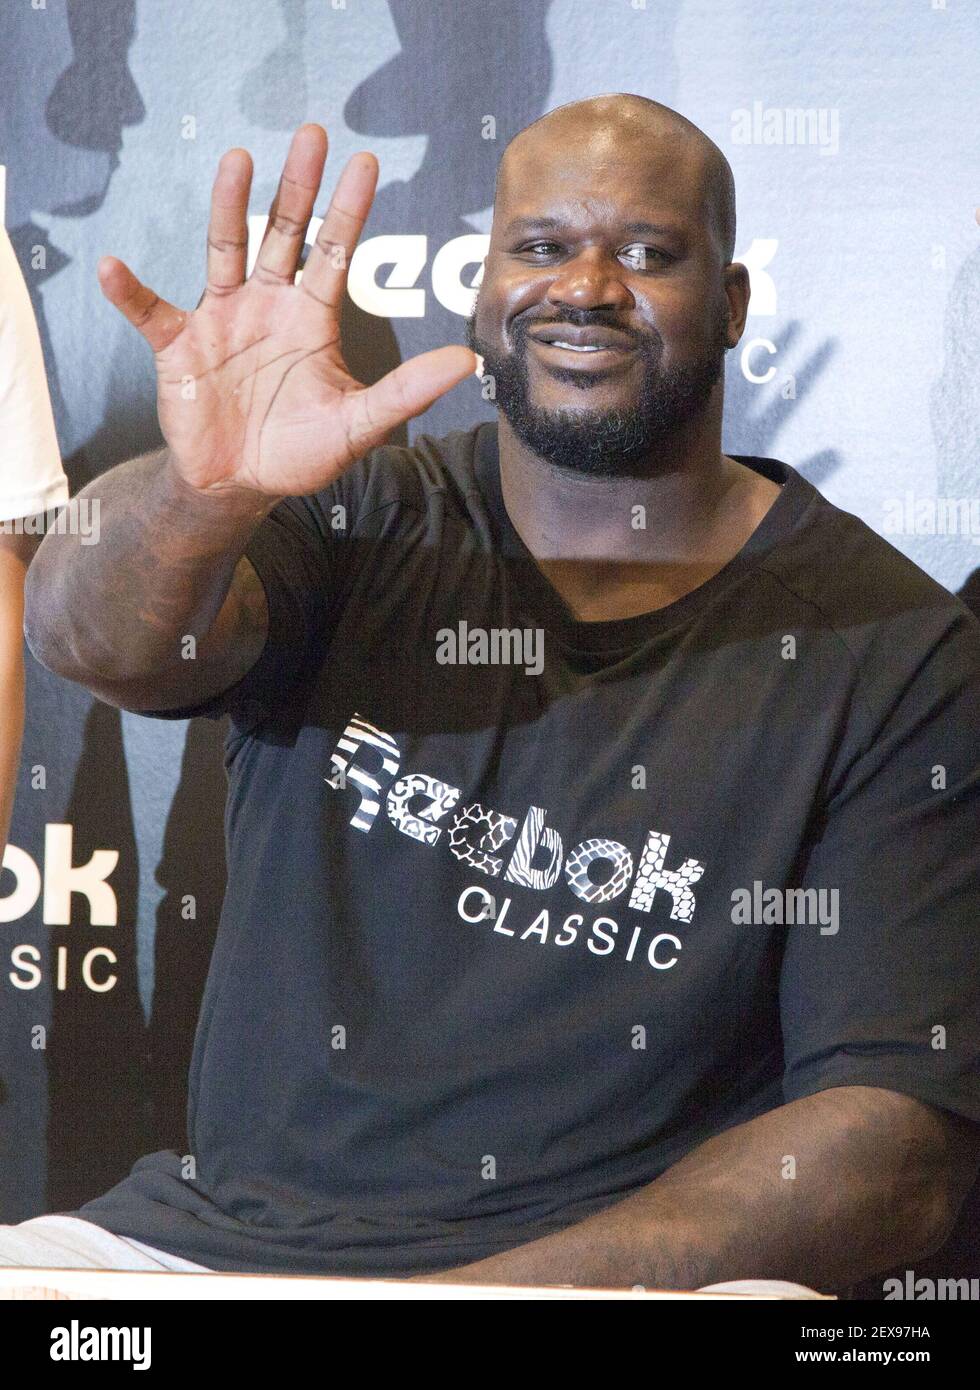 20 August 2015 - Seoul, South Korea : Shaquille Rashaun O'Neal attends the  hands printing event at Reebok Classic store in Seoul, South korea on  August 20, 2015. Shaquille O'Neal sport brand